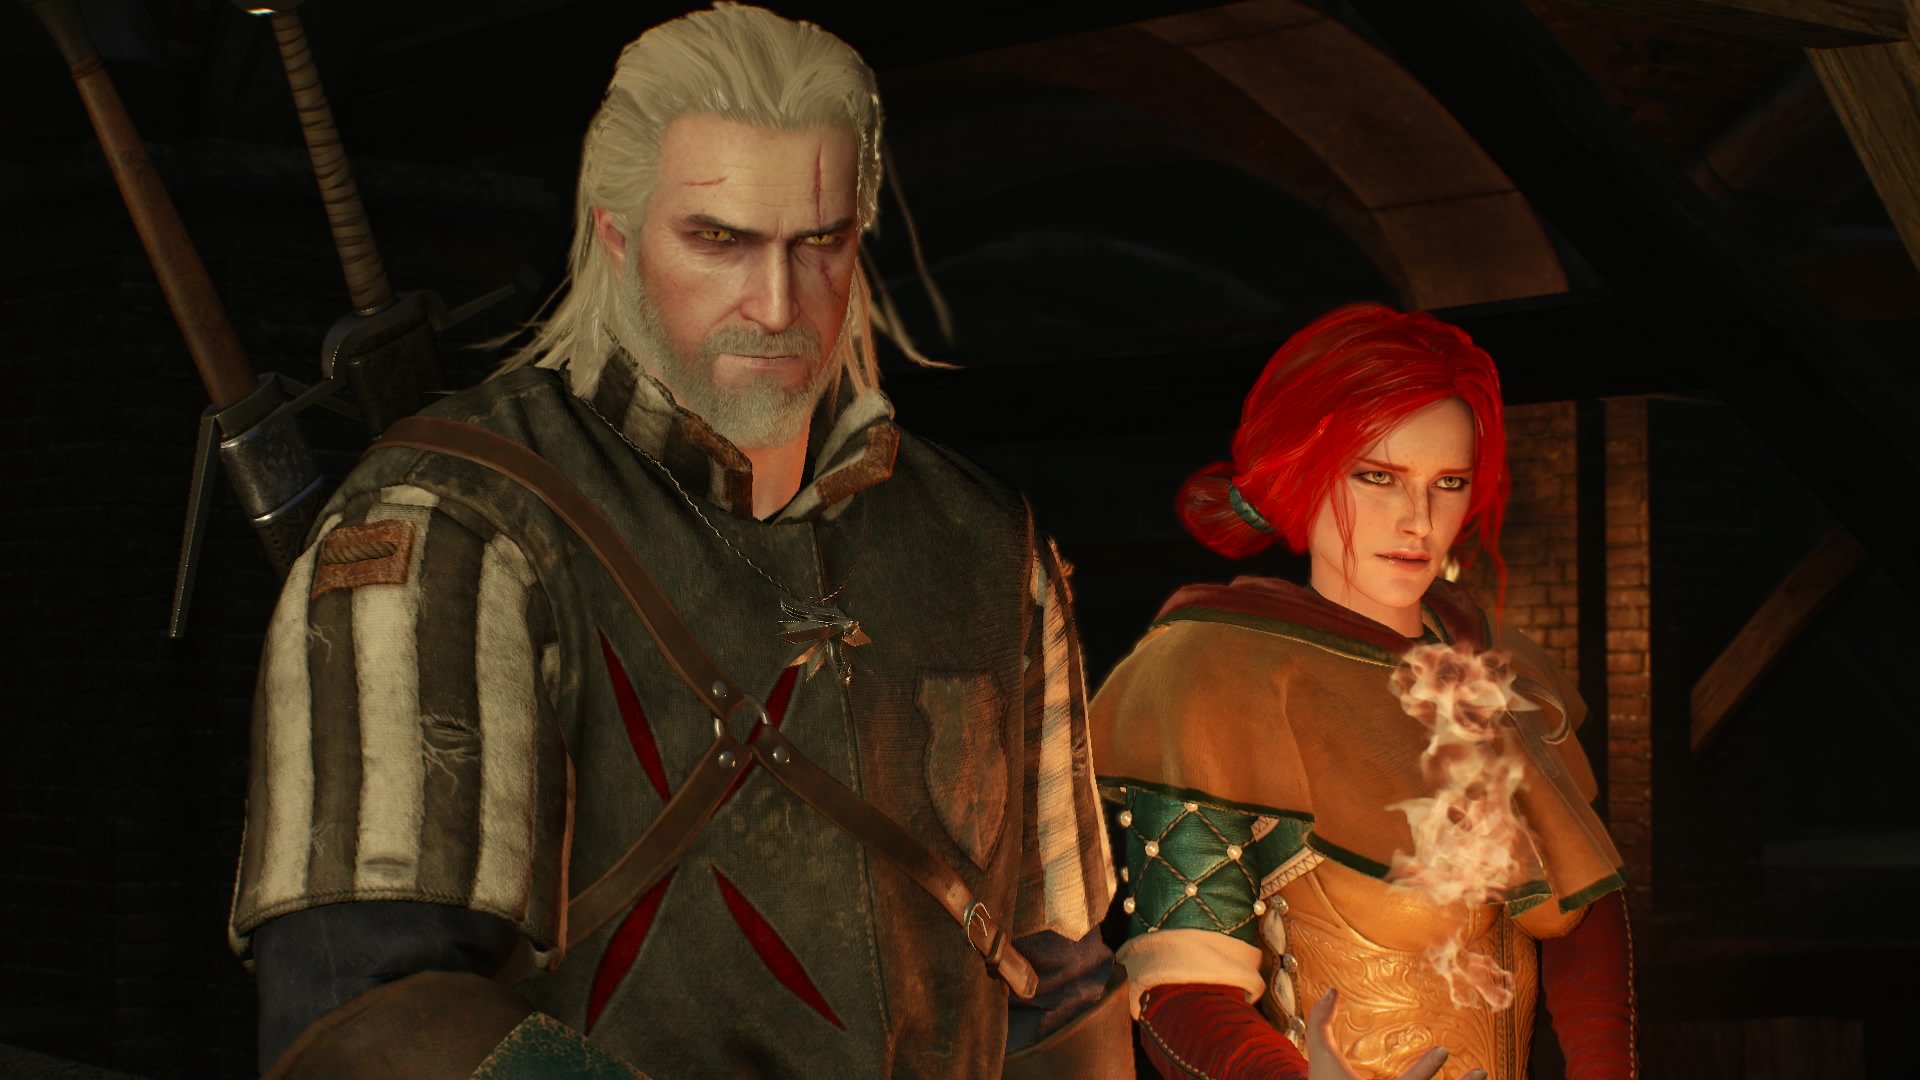 The Witcher 3: Wild Hunt Review - Game of Thrones Meets Skyrim